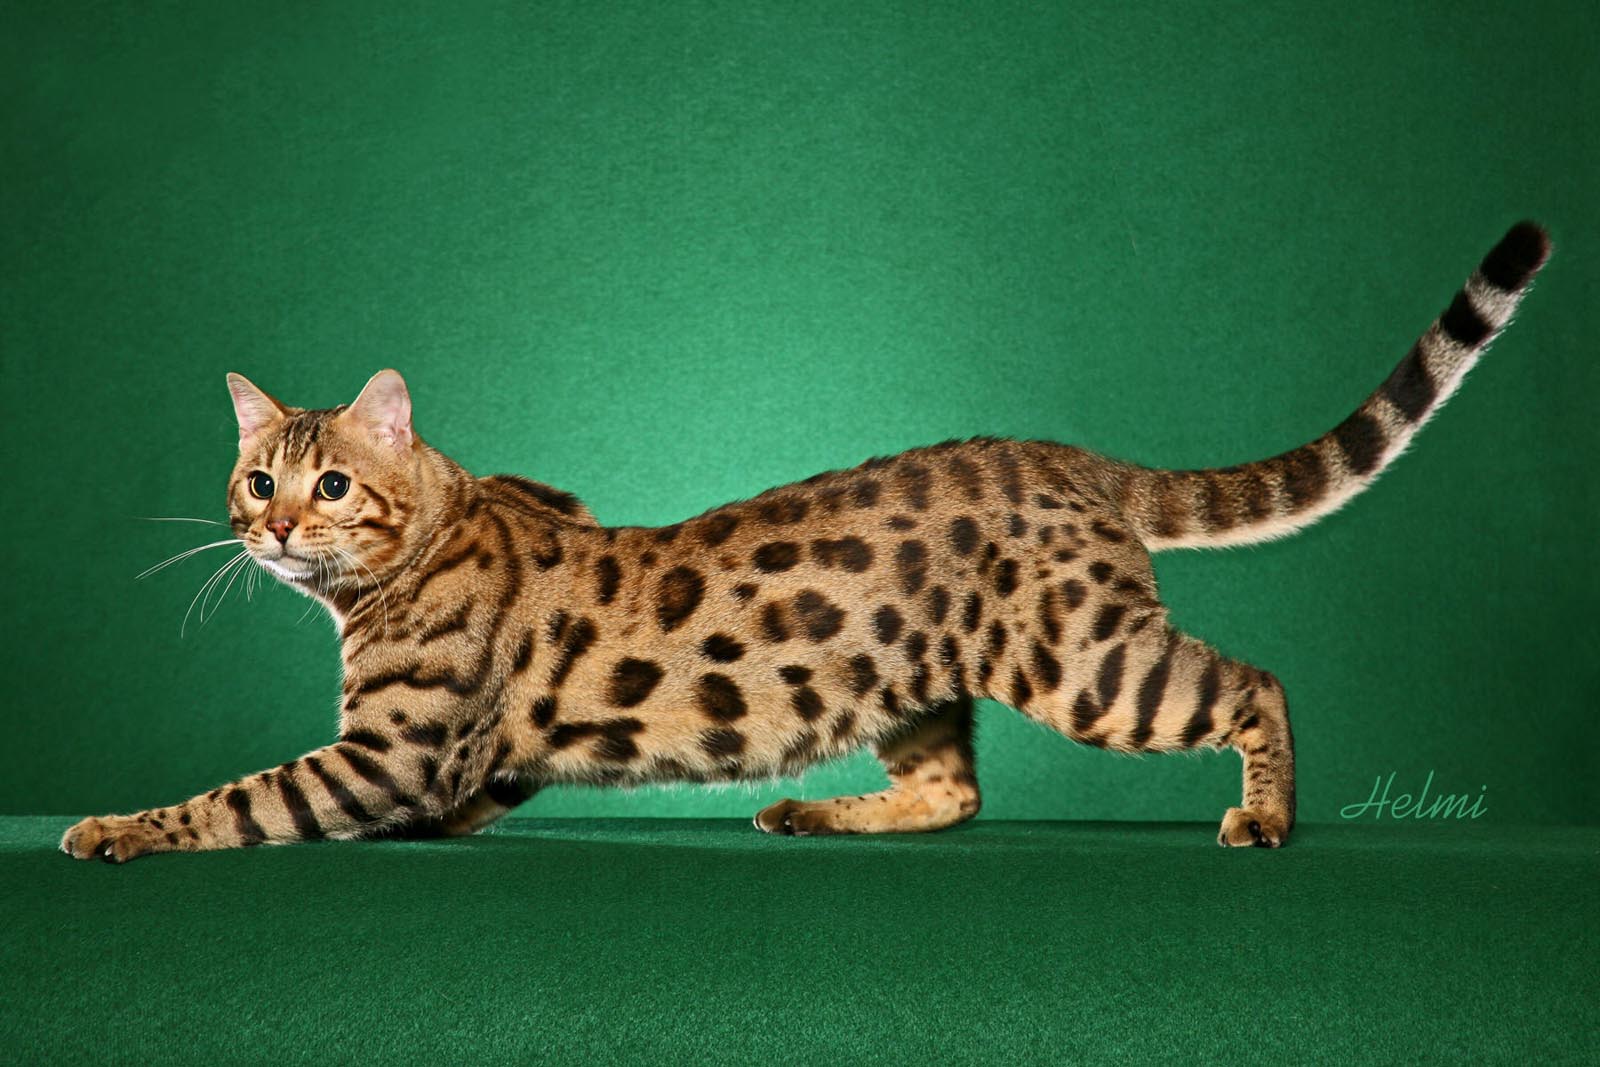 A selection of 7 Image of Bengal Cats in HD quality